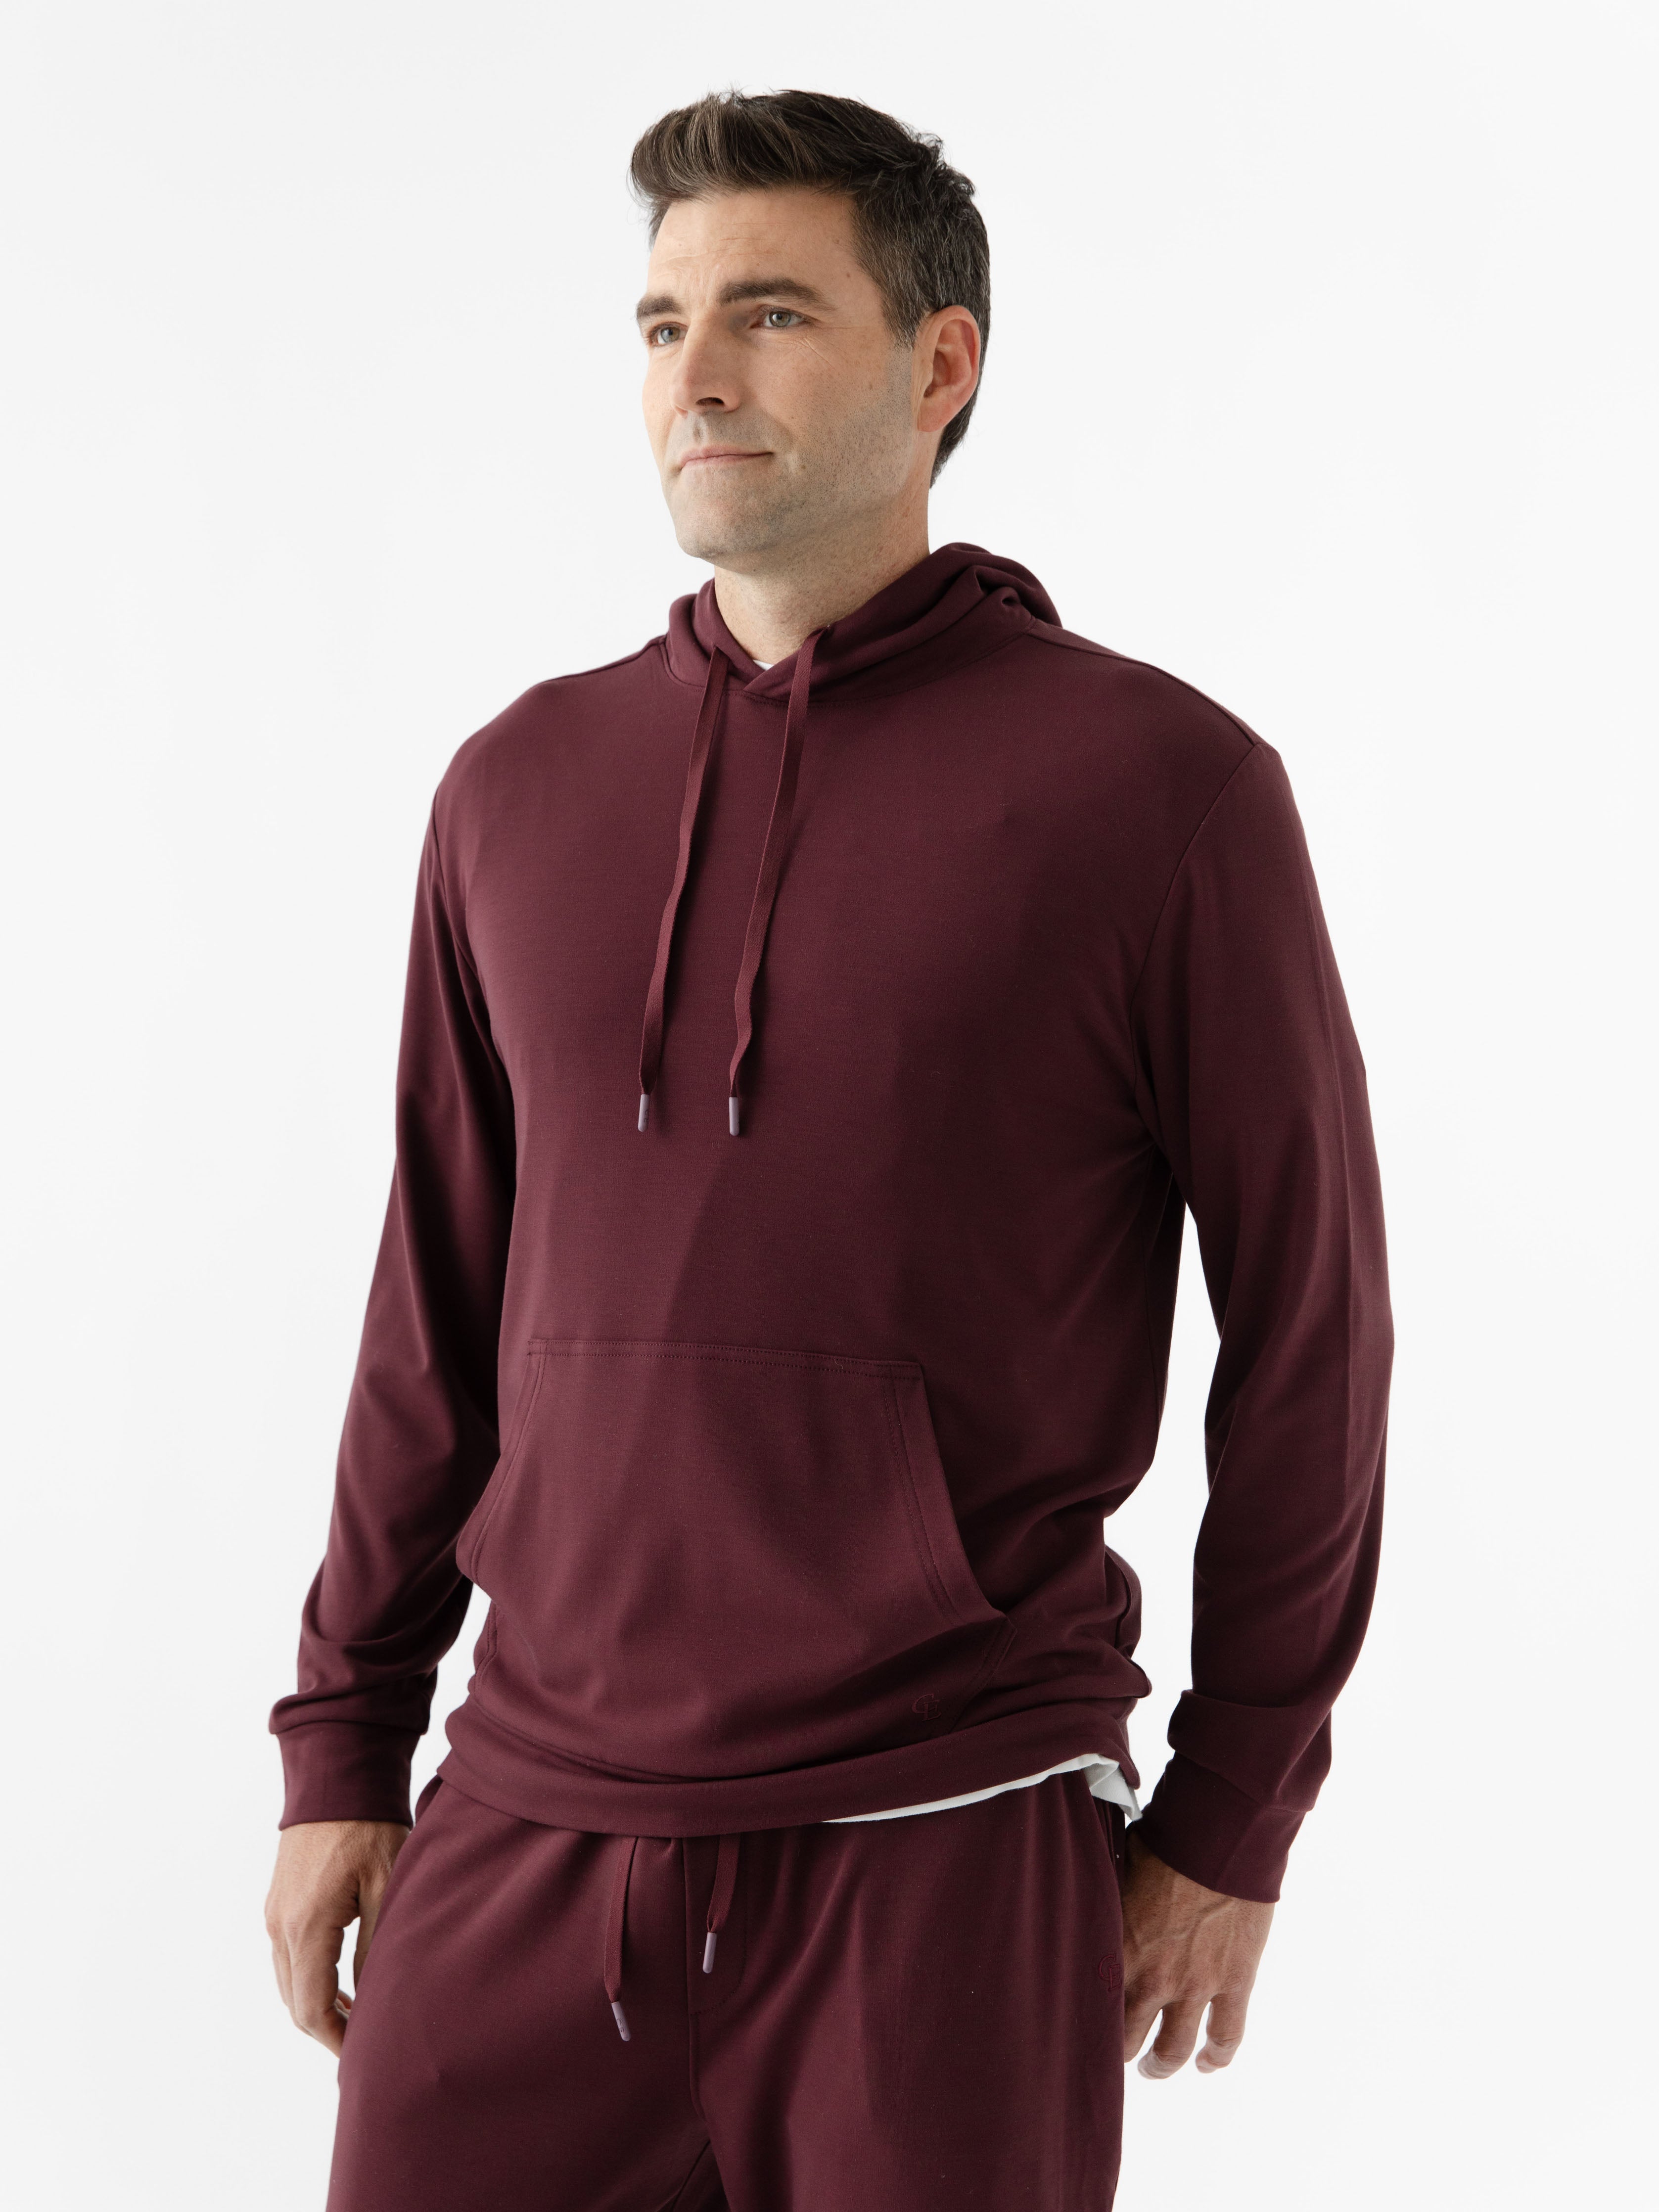 Burgundy Bamboo Hoodie worn by man standing in front of white background.|Color:Burgundy